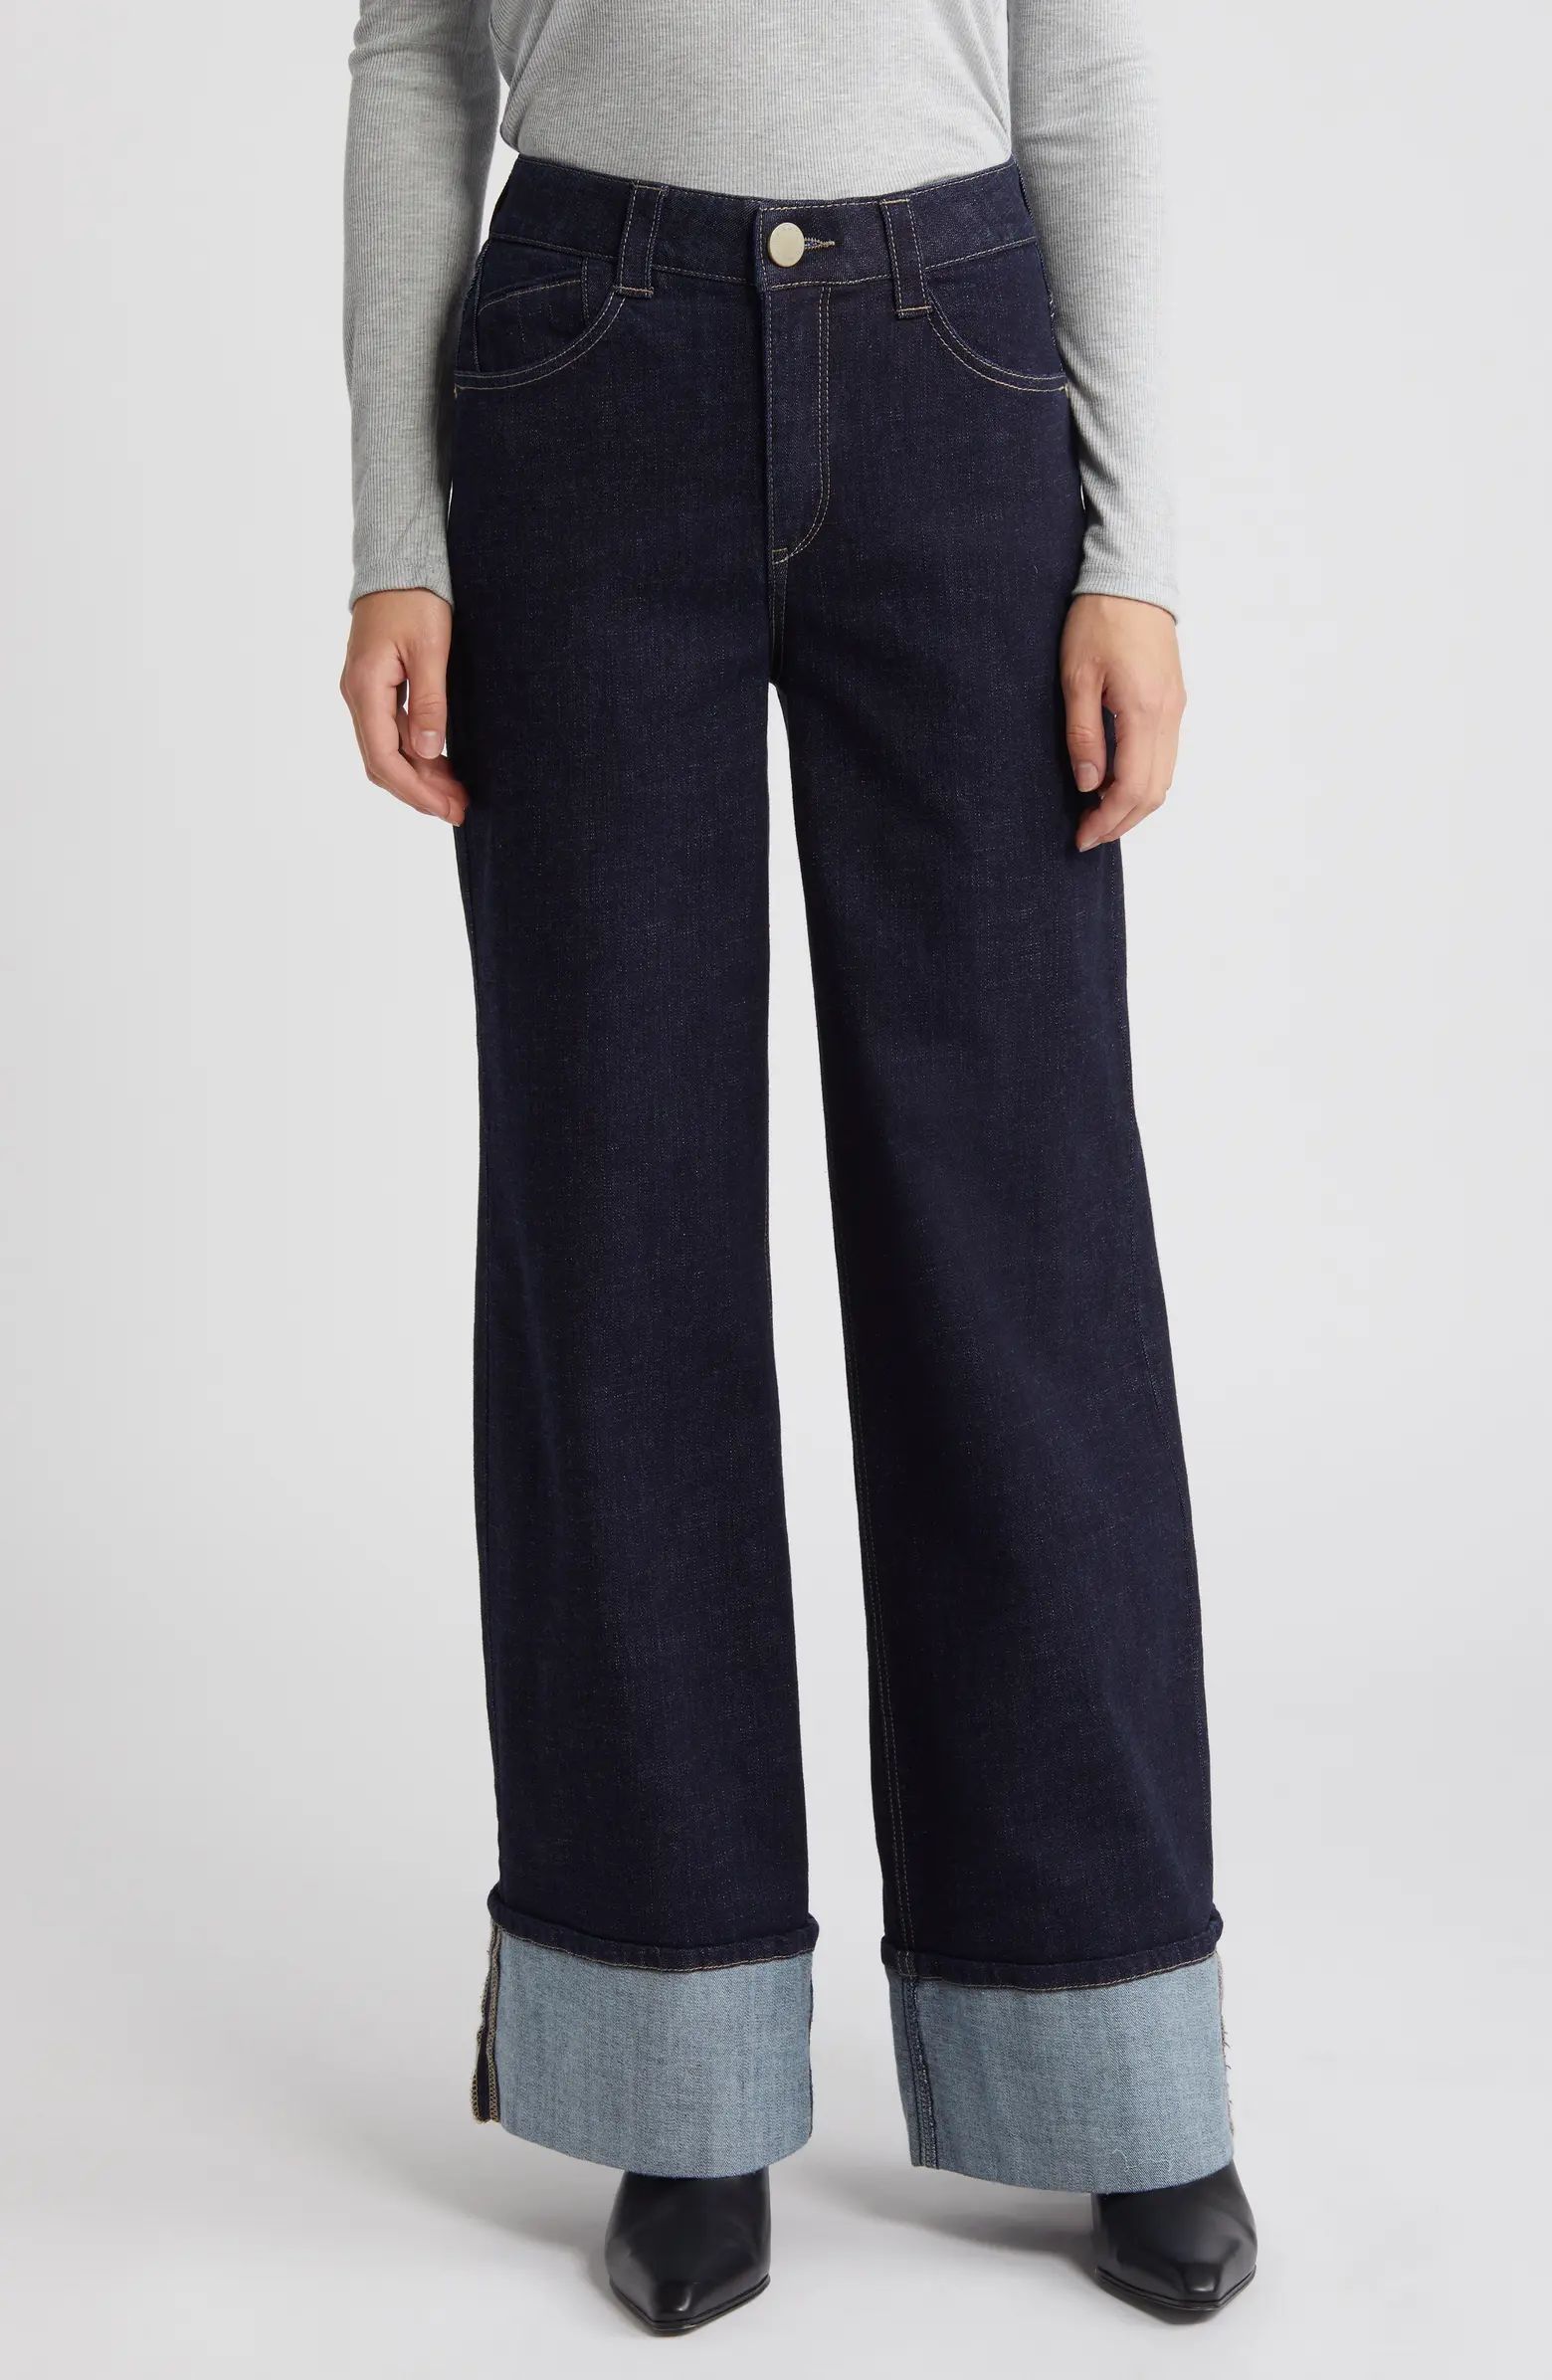 'Ab'Solution Skyrise Cuffed Wide Leg Jeans | Nordstrom